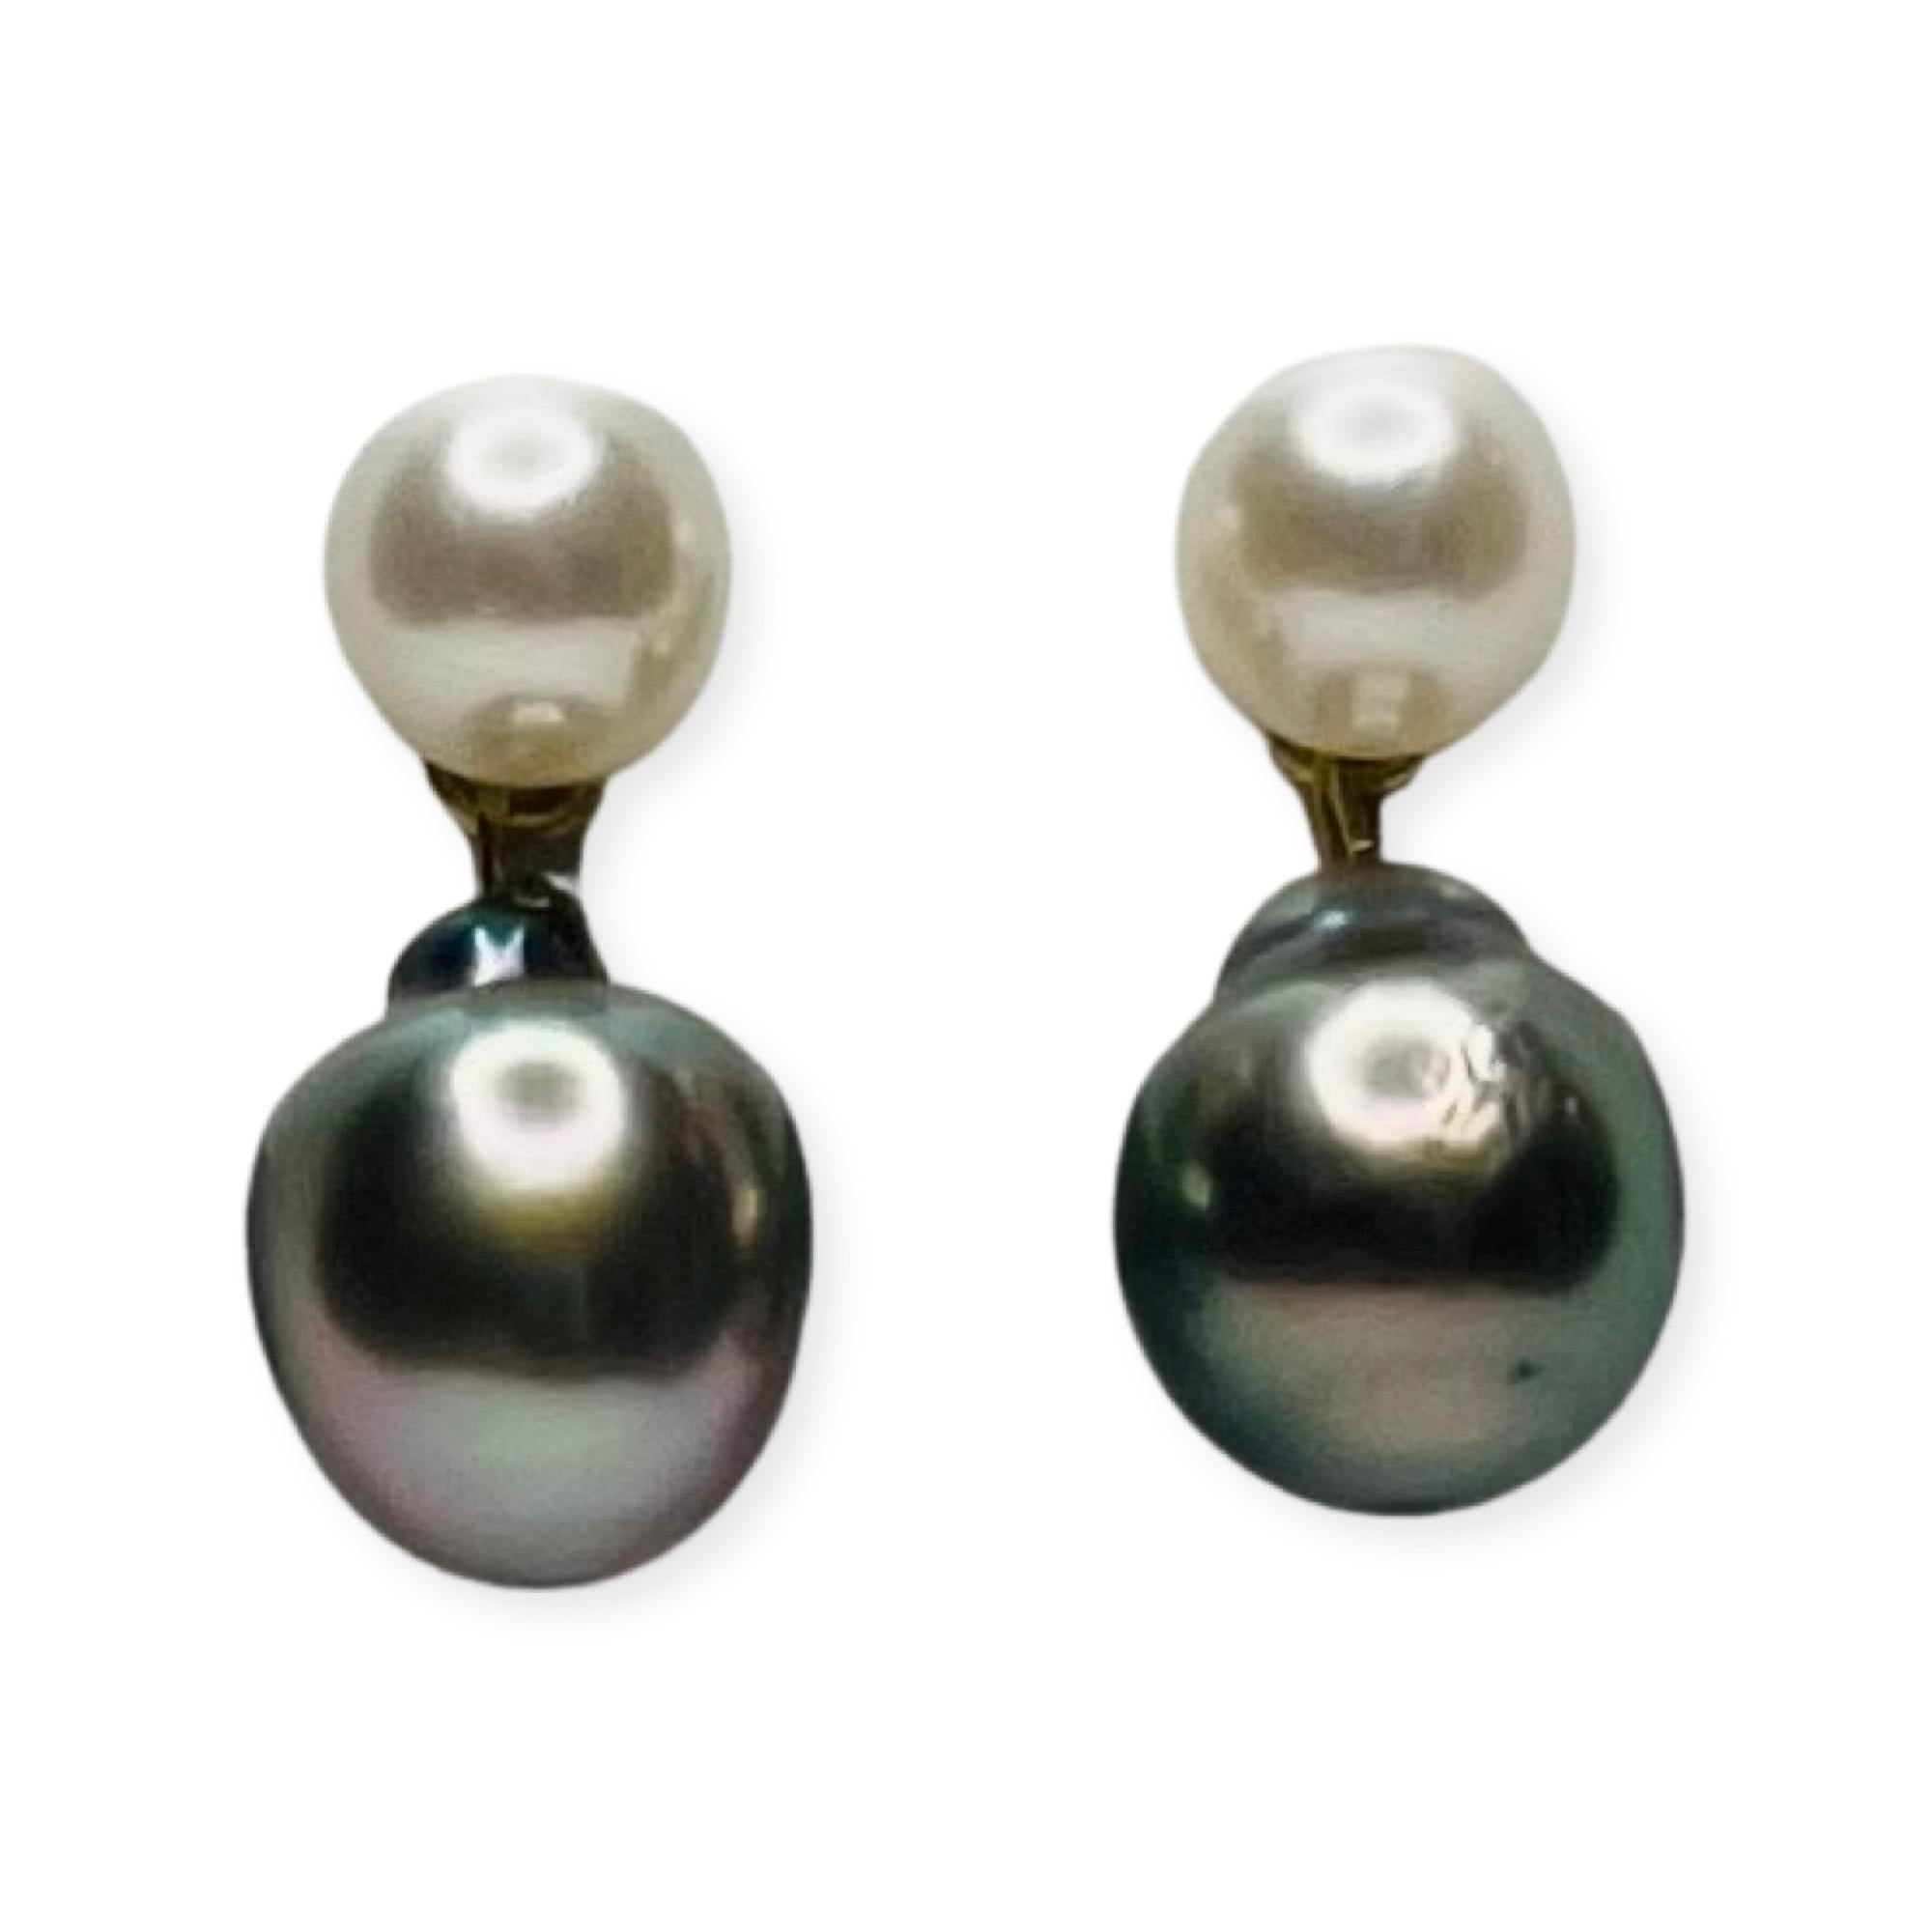 Lithos 14K & 18K Yellow Gold Cultured Japanese Akoya and Natural Color Tahitian Black Pearl Earrings. The akoya pearls are 7.0 mm - 7.5 mm. They are round with slight blemishes and high luster. The Tahitian black pearls are 10.0 mm - 10.5 mm. These